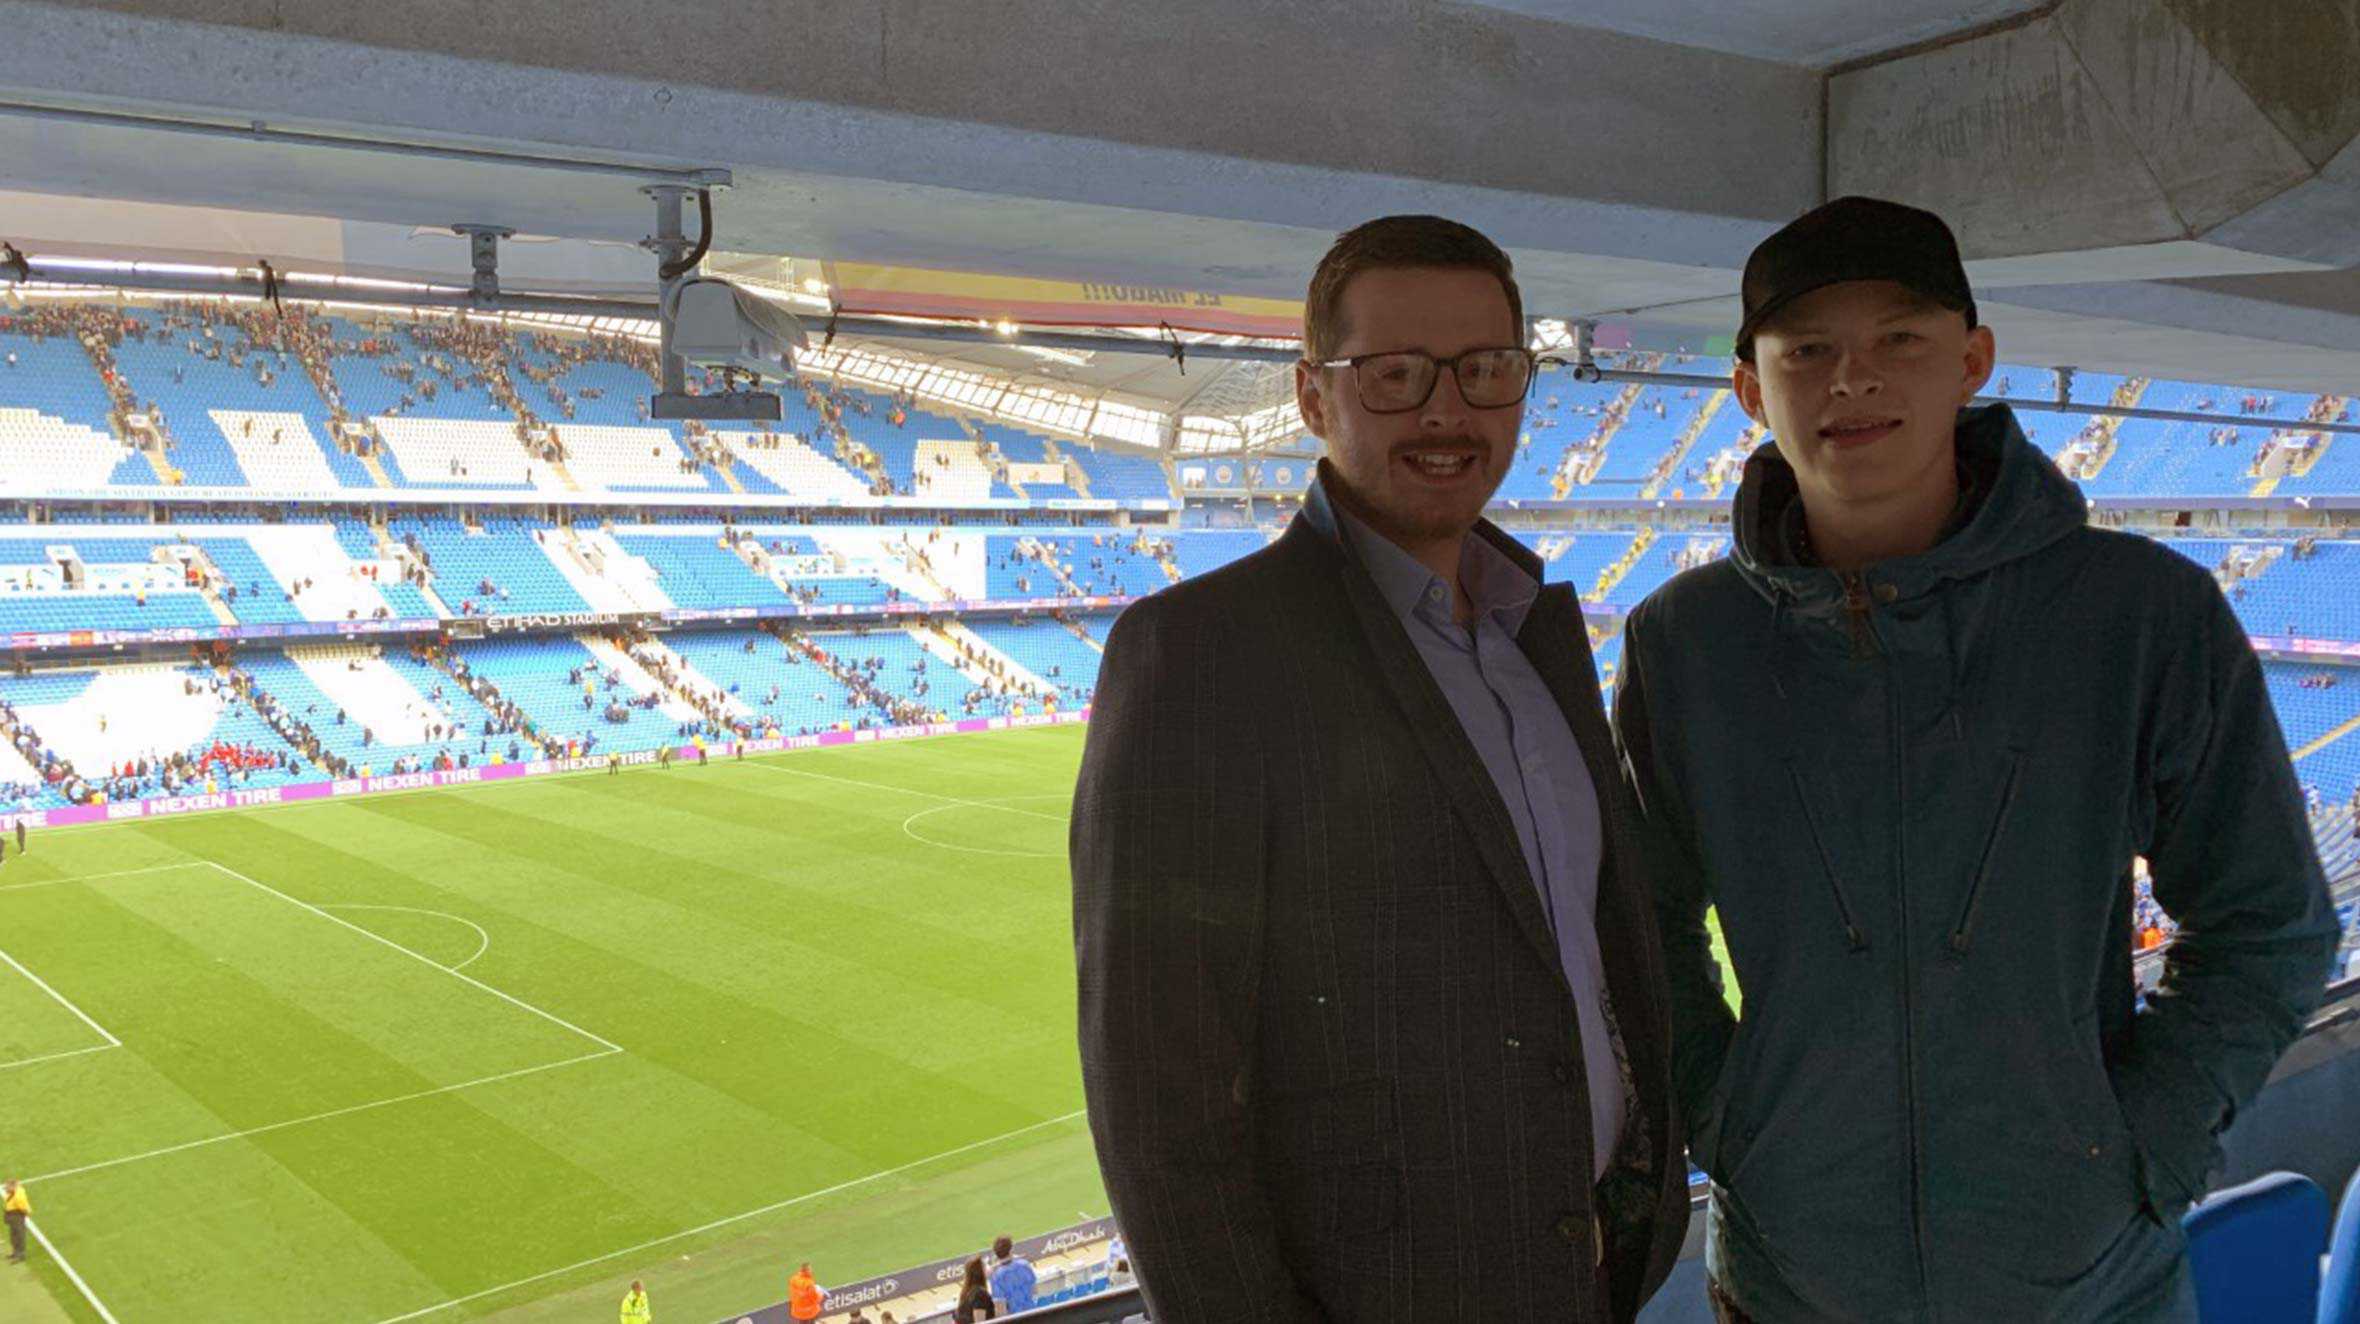 Harrison and Josh in their VIP box facing the camera and smiling, with the football pitch behind them.